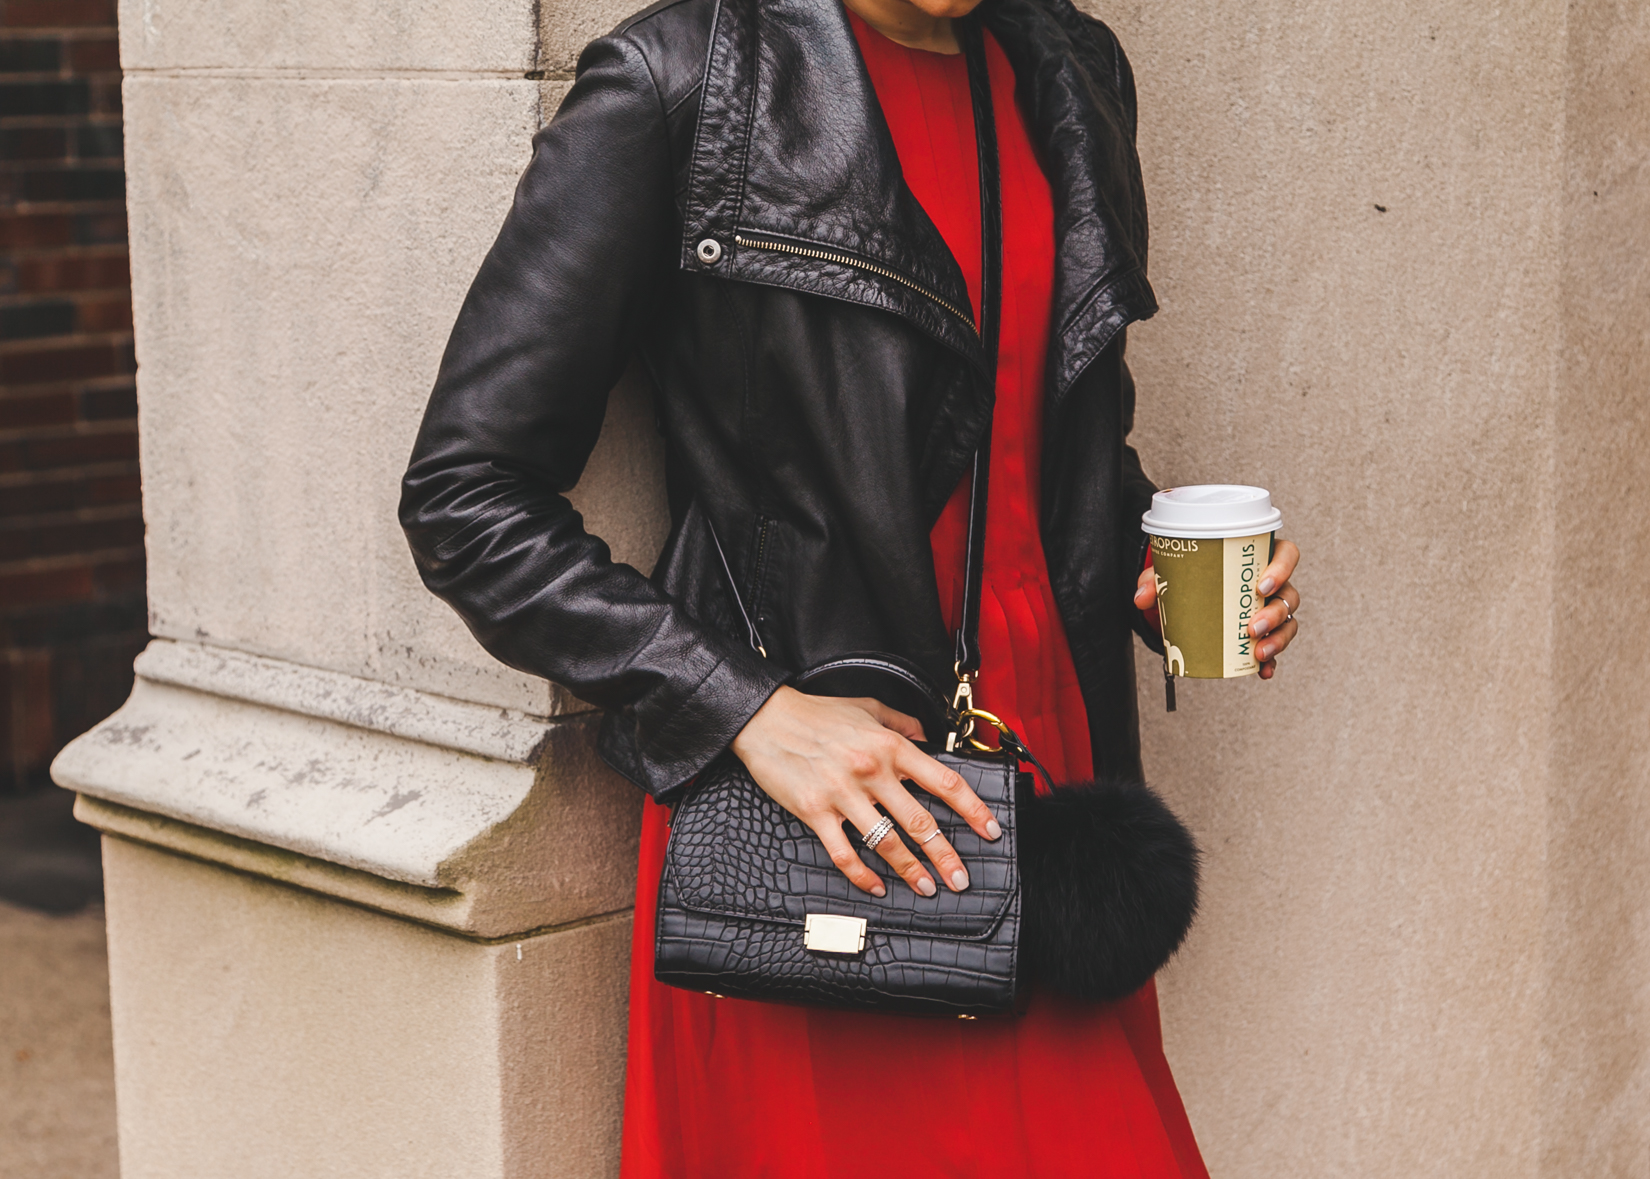 Yana Frigelis from NoMad Luxuries wearing a red dress and leather moto jacket for the fall for an edgy and feminine look from Zara 